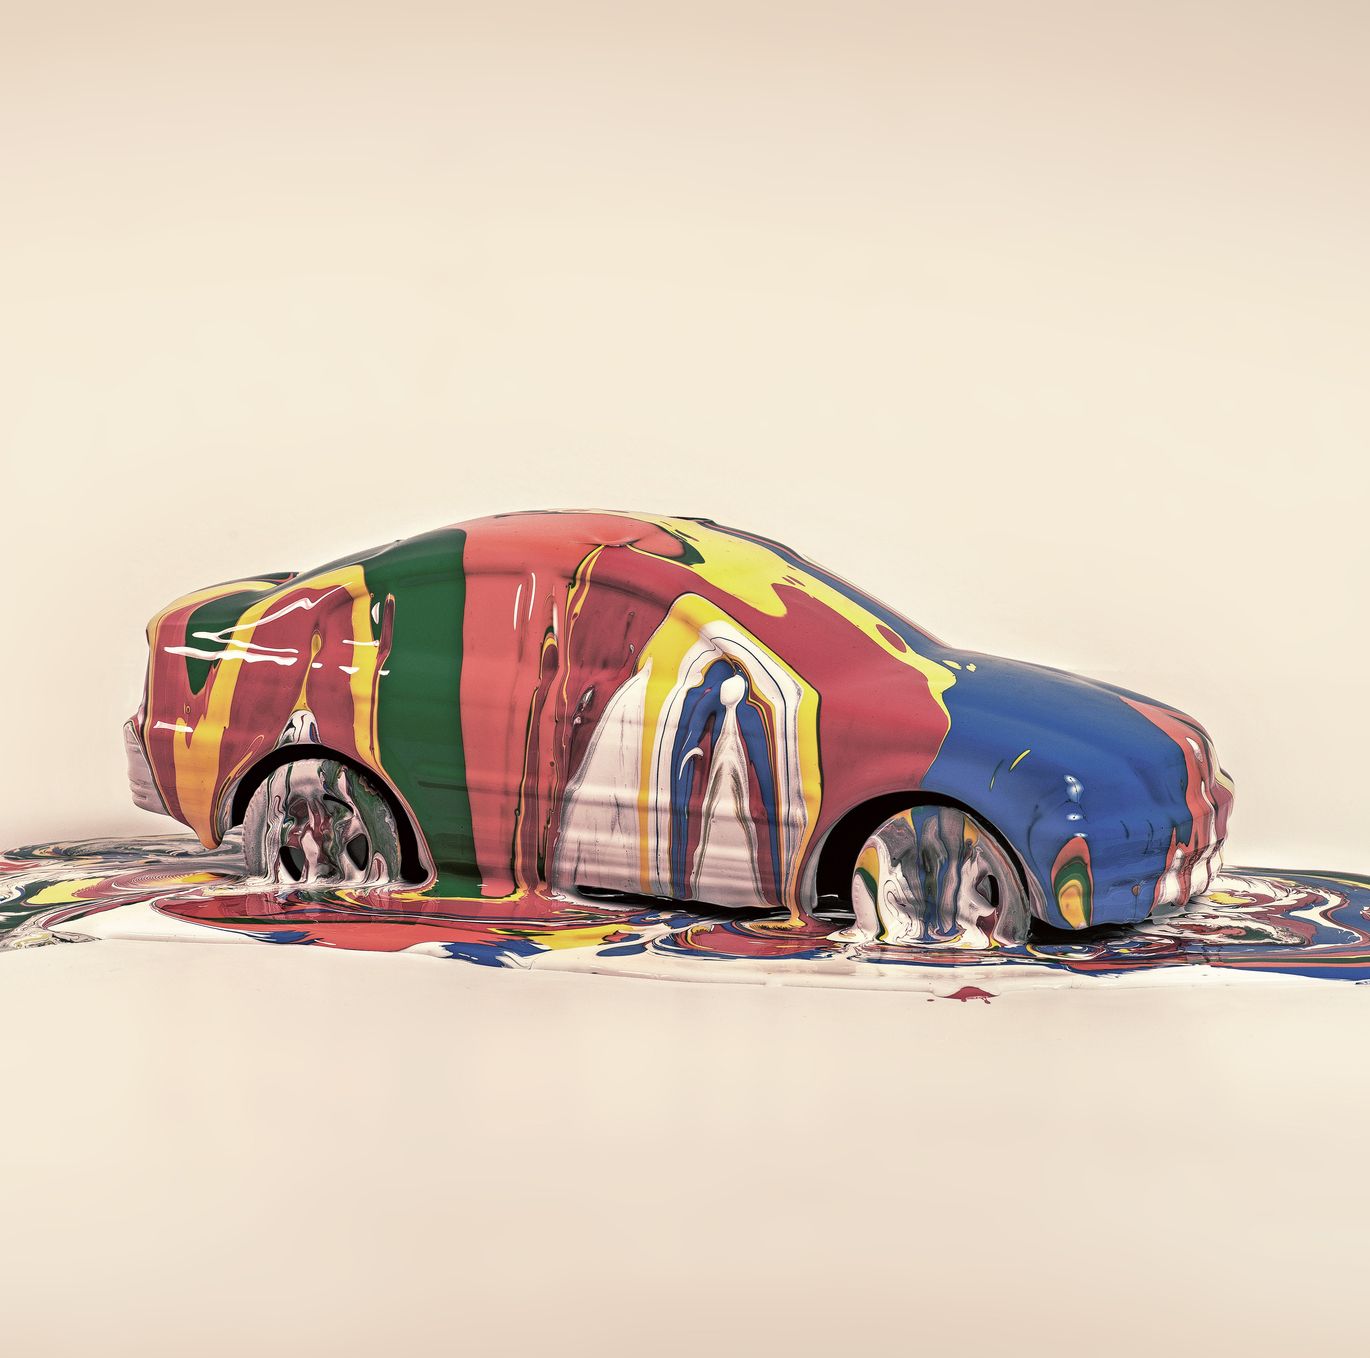 How to Paint a Car Yourself